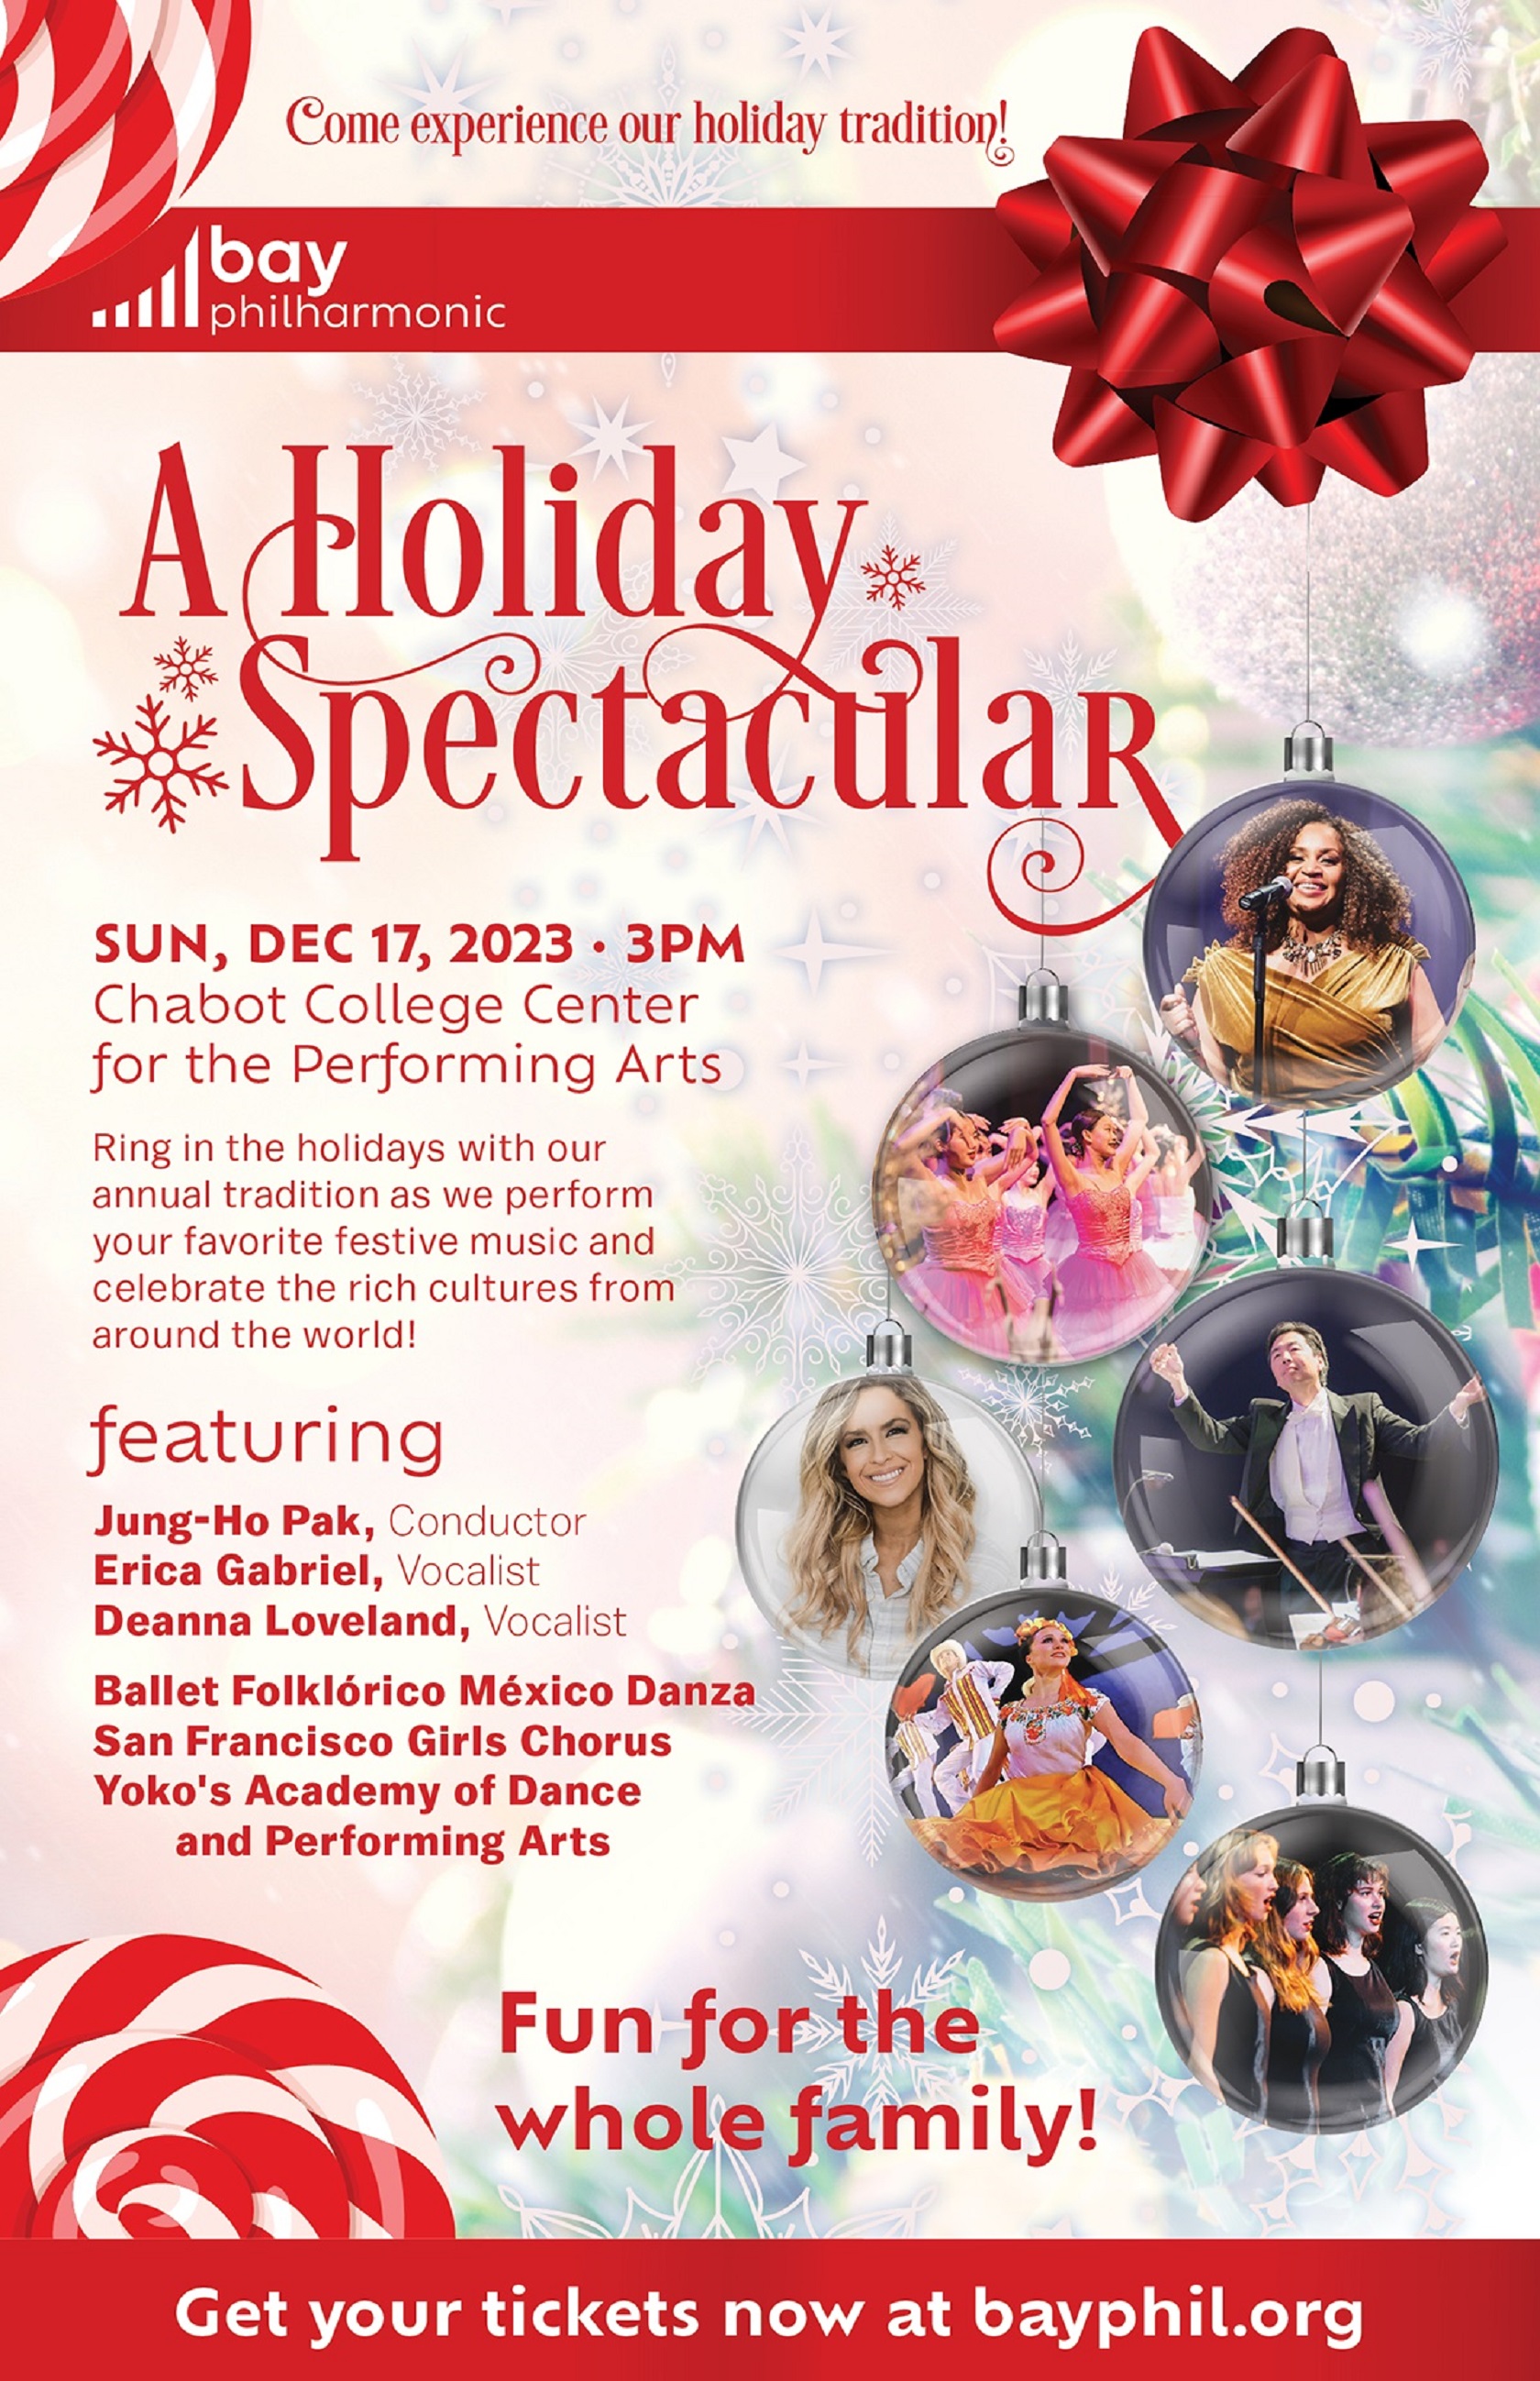 Bay Philharmonic Presents 'A Holiday Spectacular' on Dec. 17 - a multi-sensory and multi-genre show